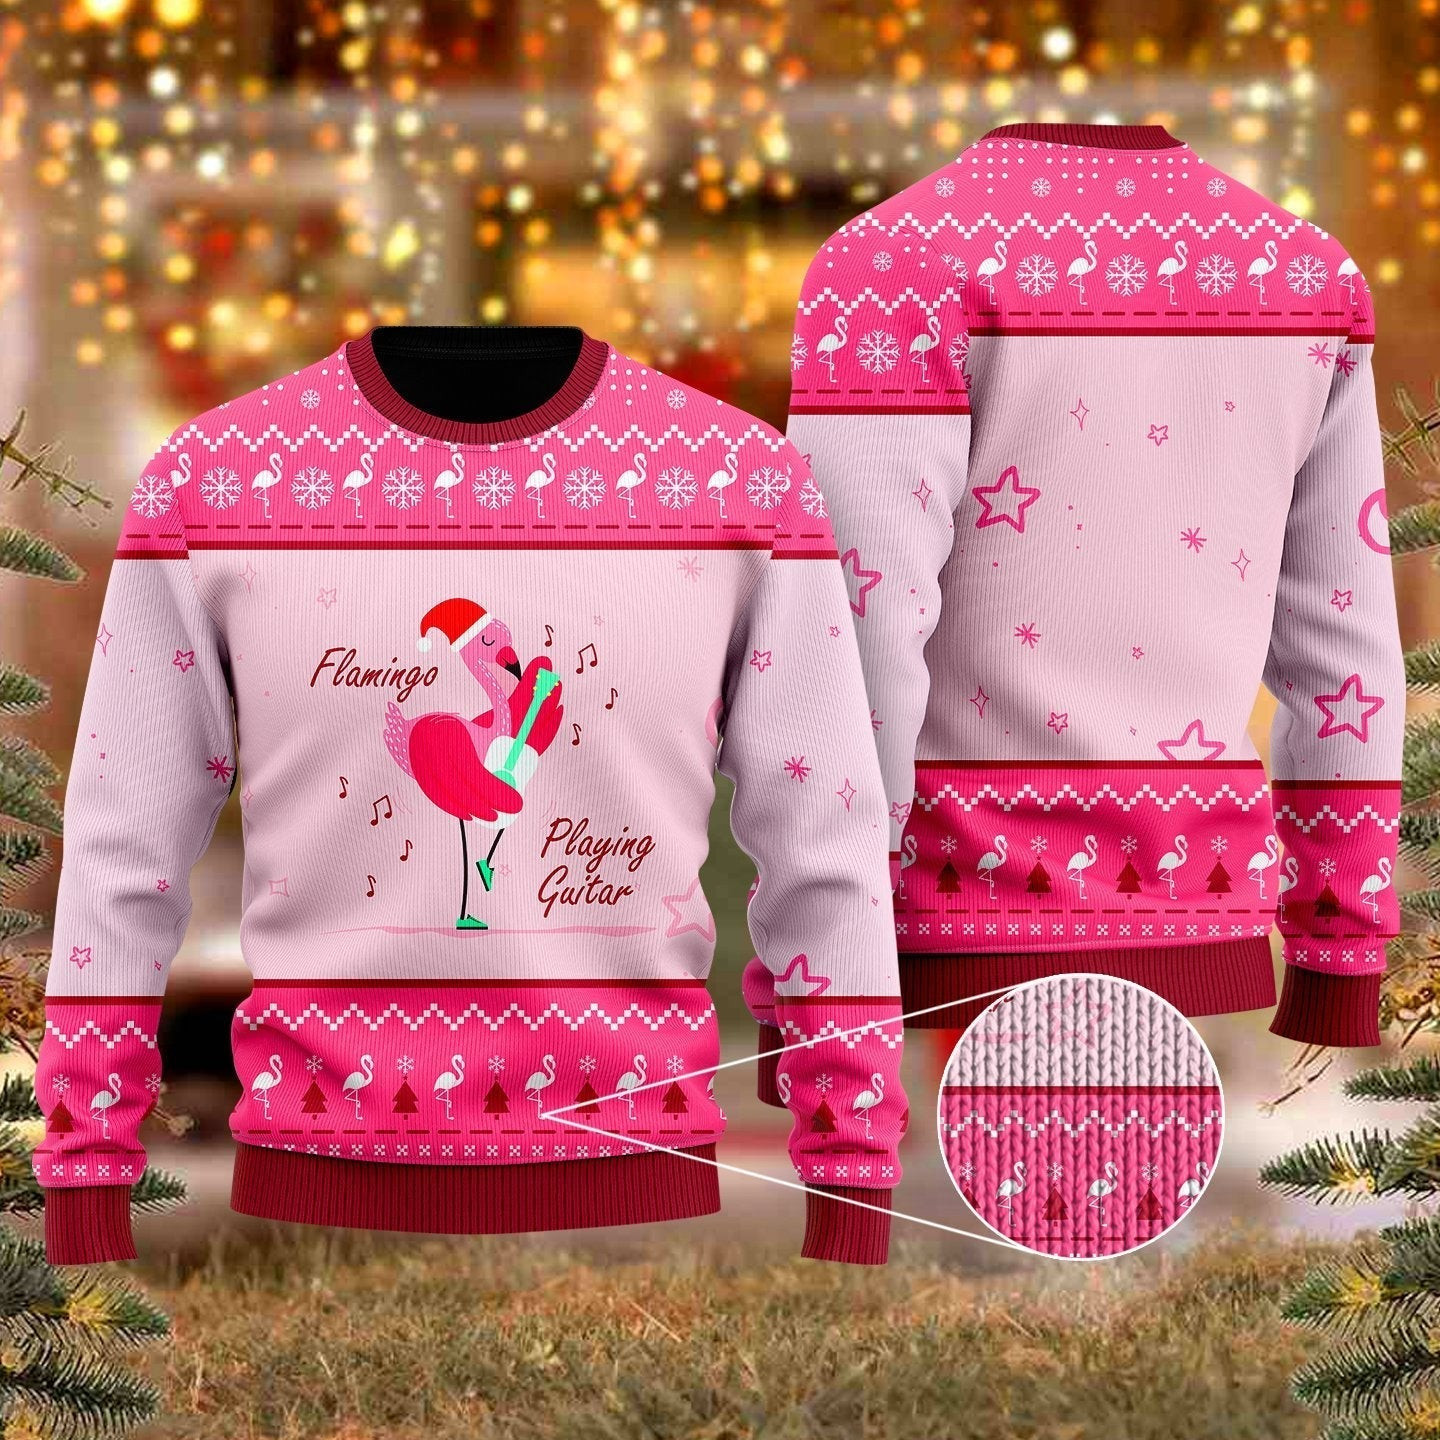 Funny Flamingo Playing Guitar Christmas Ugly Christmas Sweater Ugly Sweater For Men Women